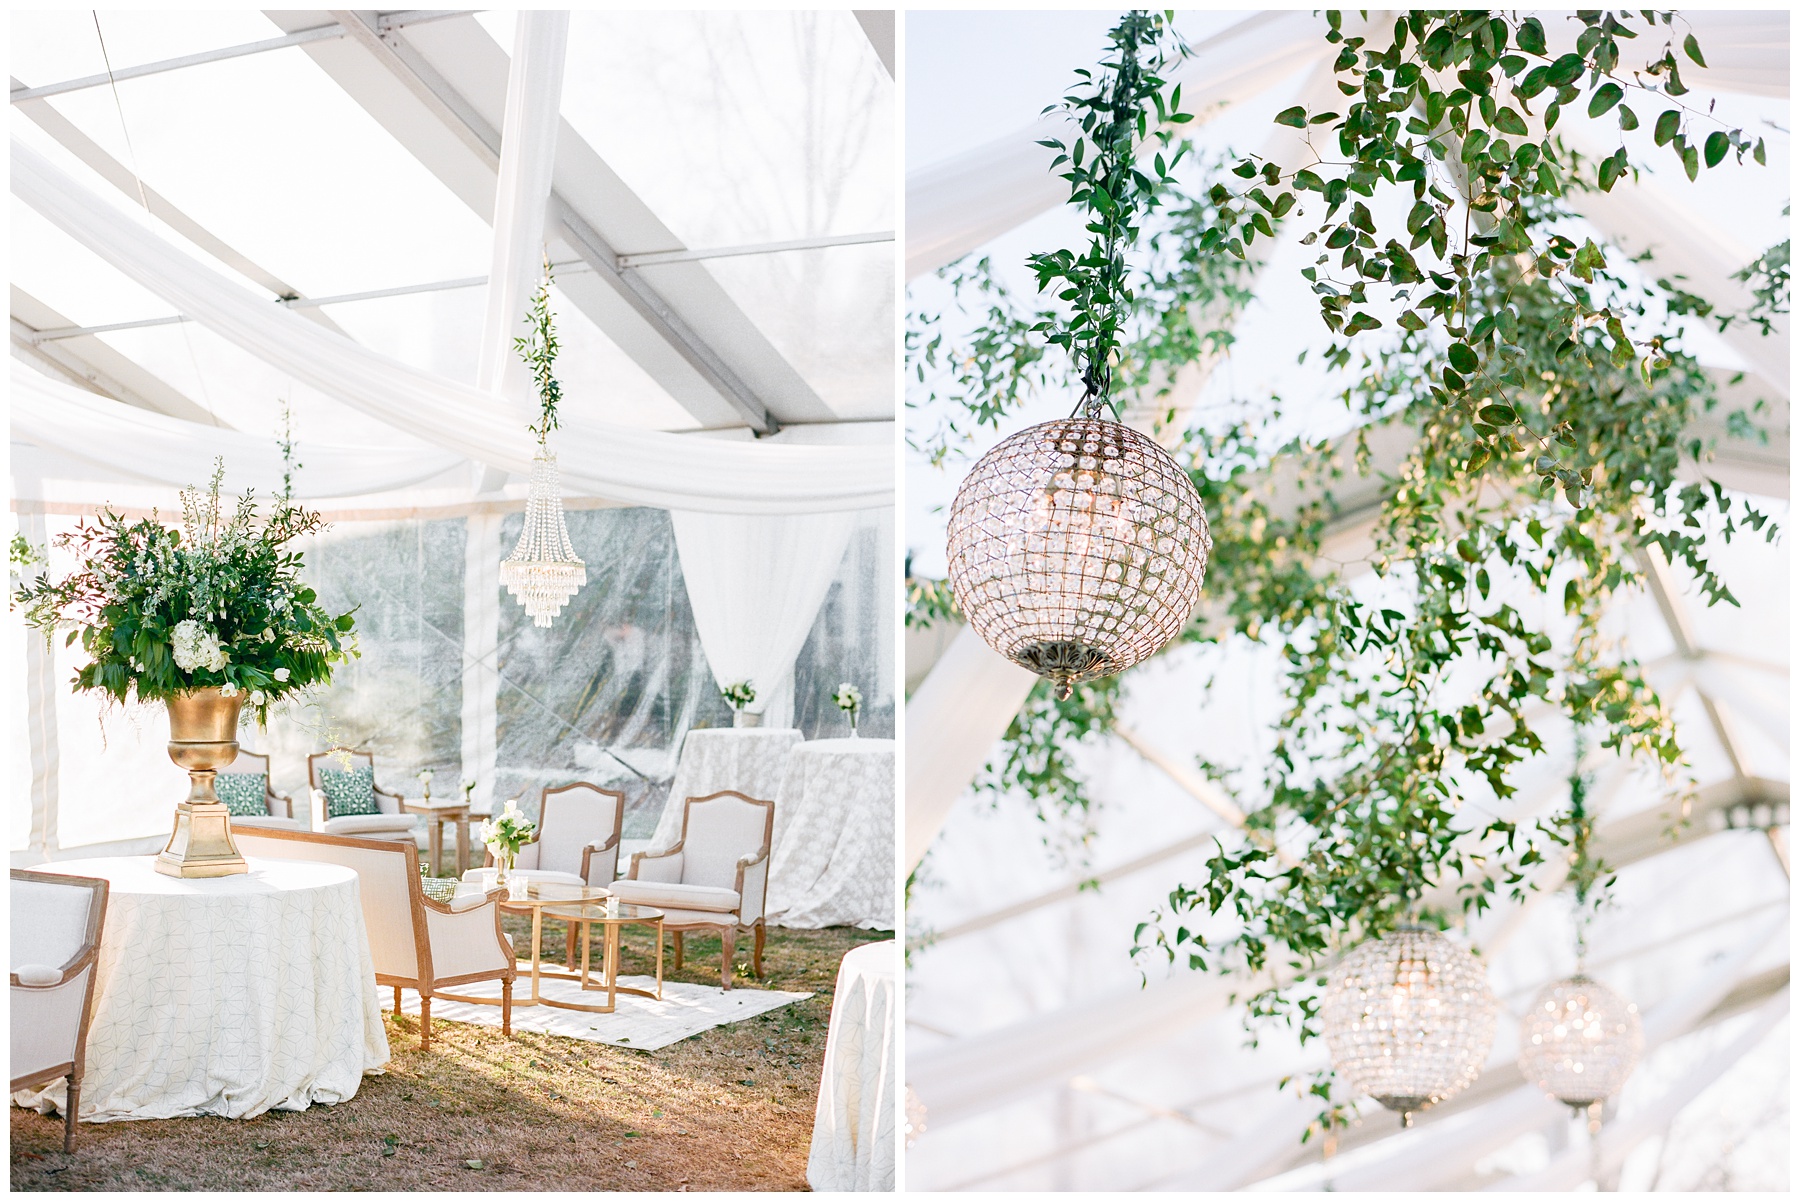 Quail Hollow Club wedding reception in tent with hanging chandeliers and greenery vines